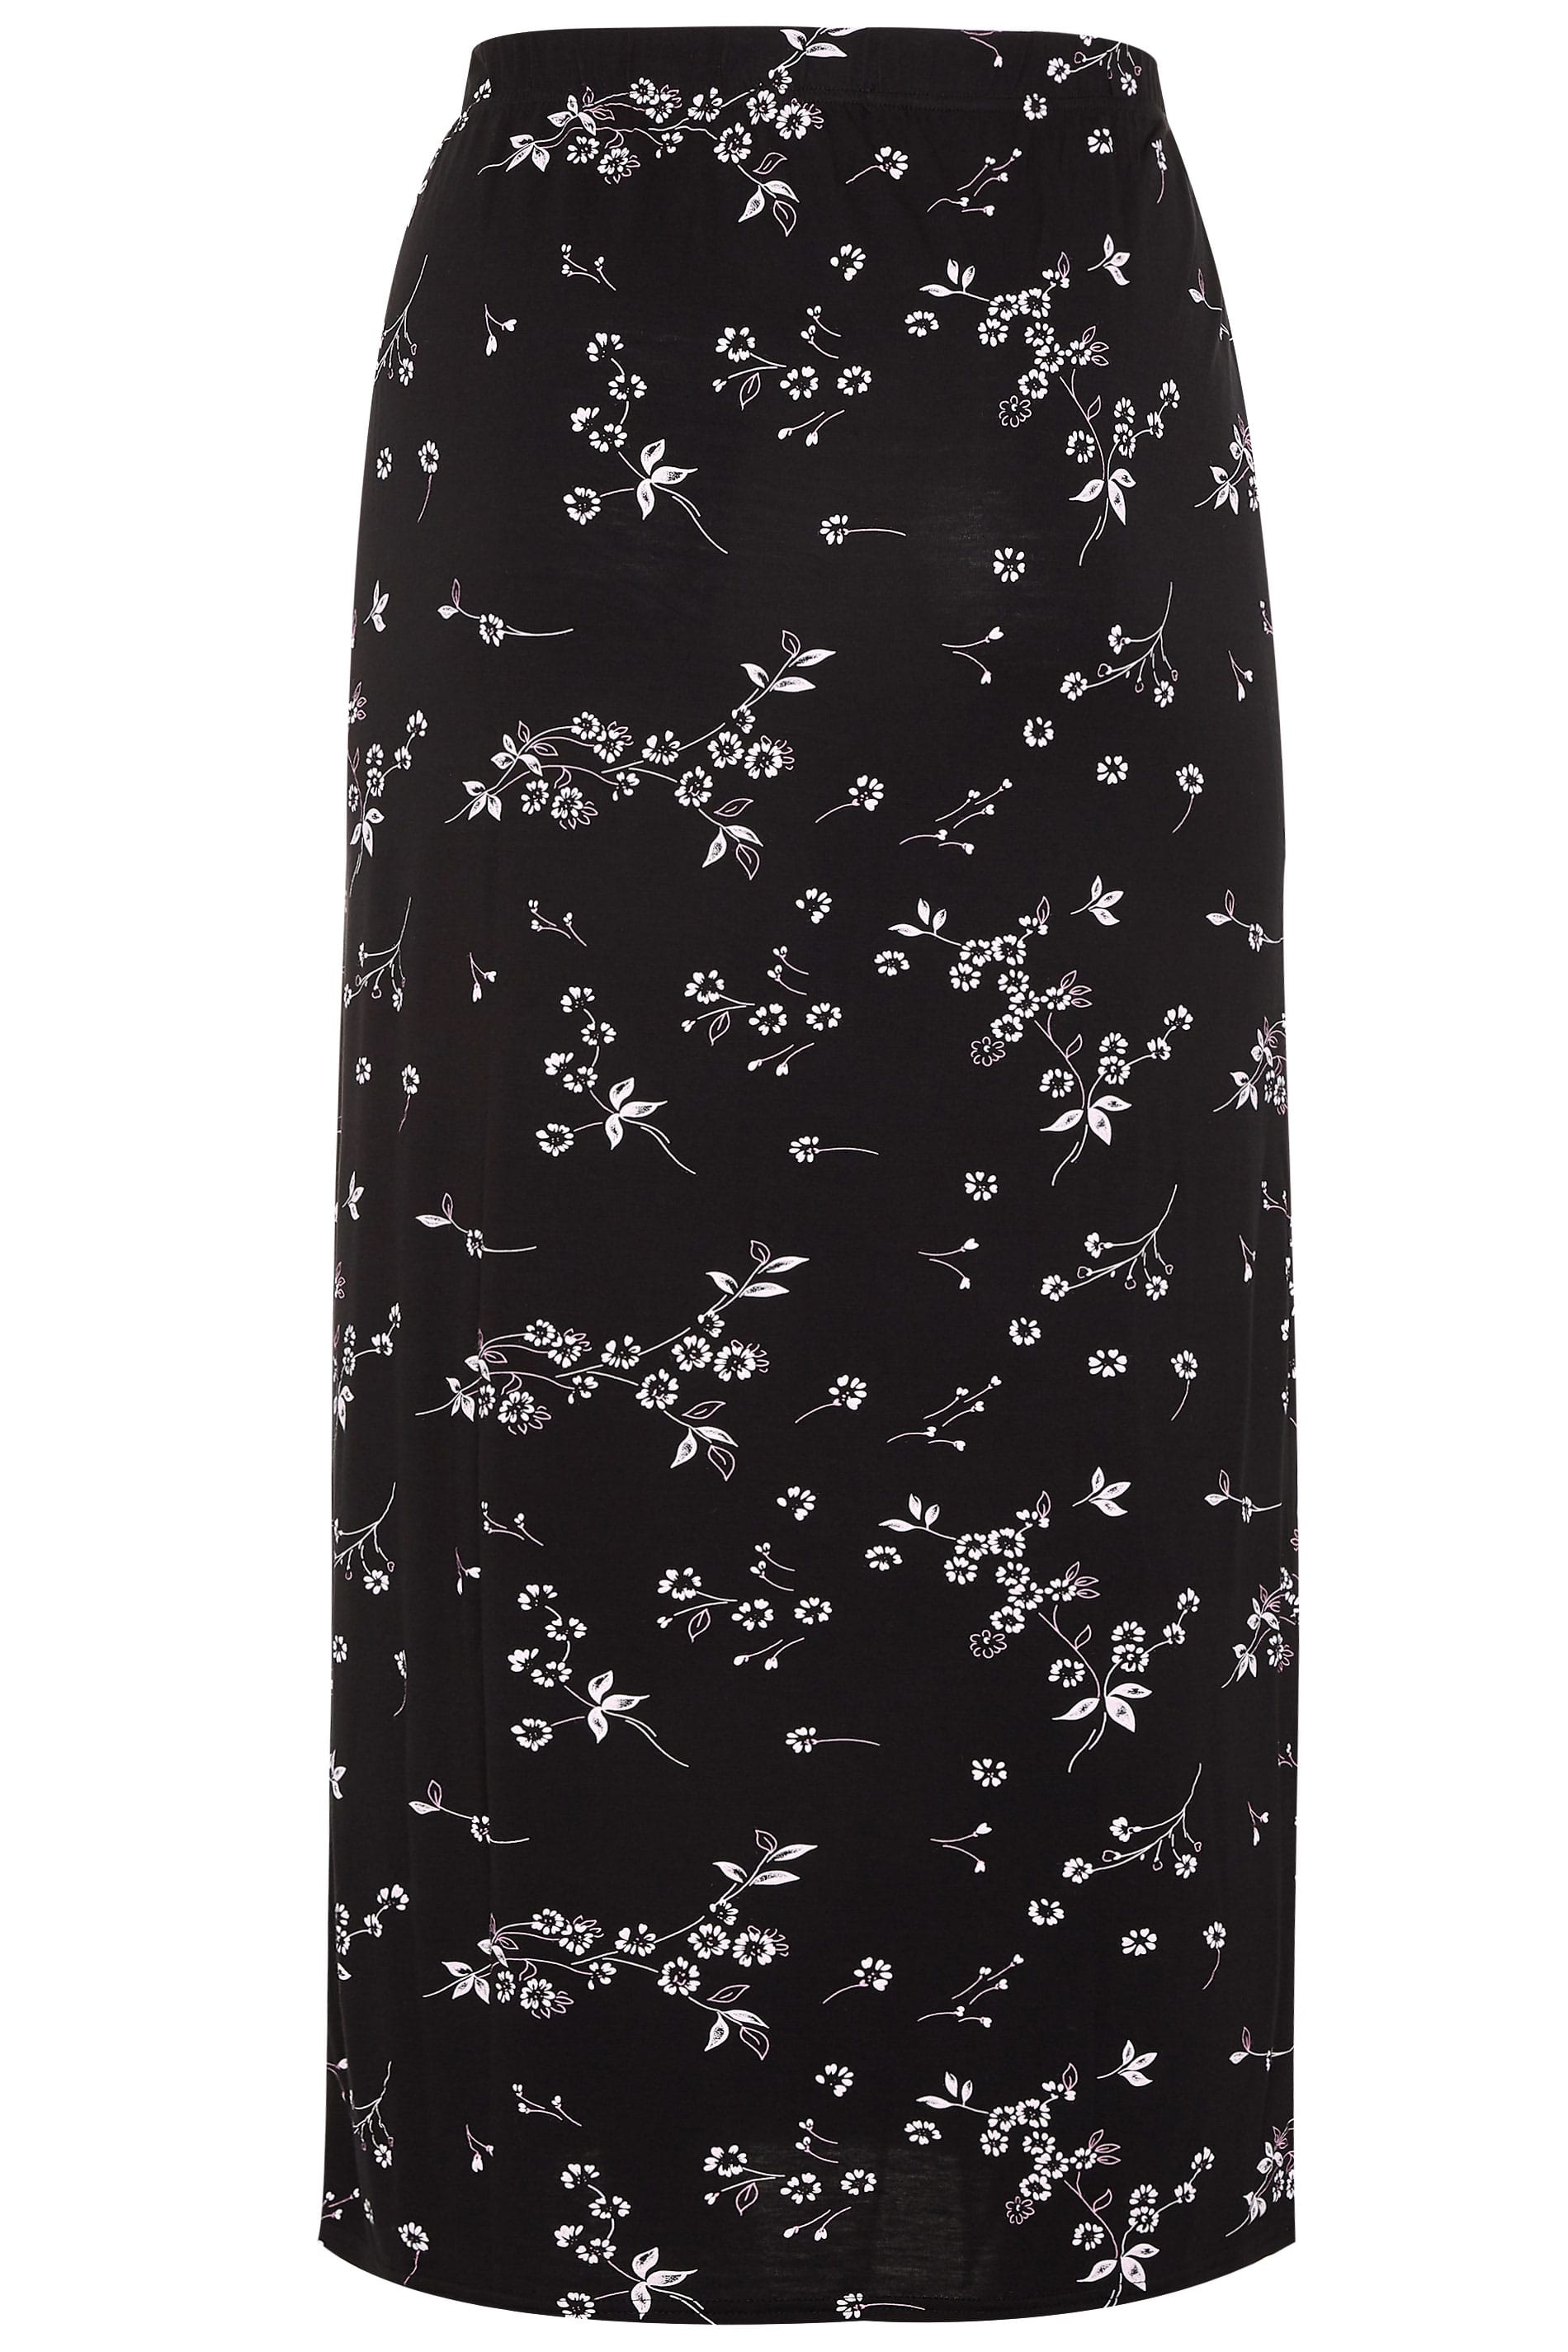 Black Floral Maxi Tube Skirt | Yours Clothing